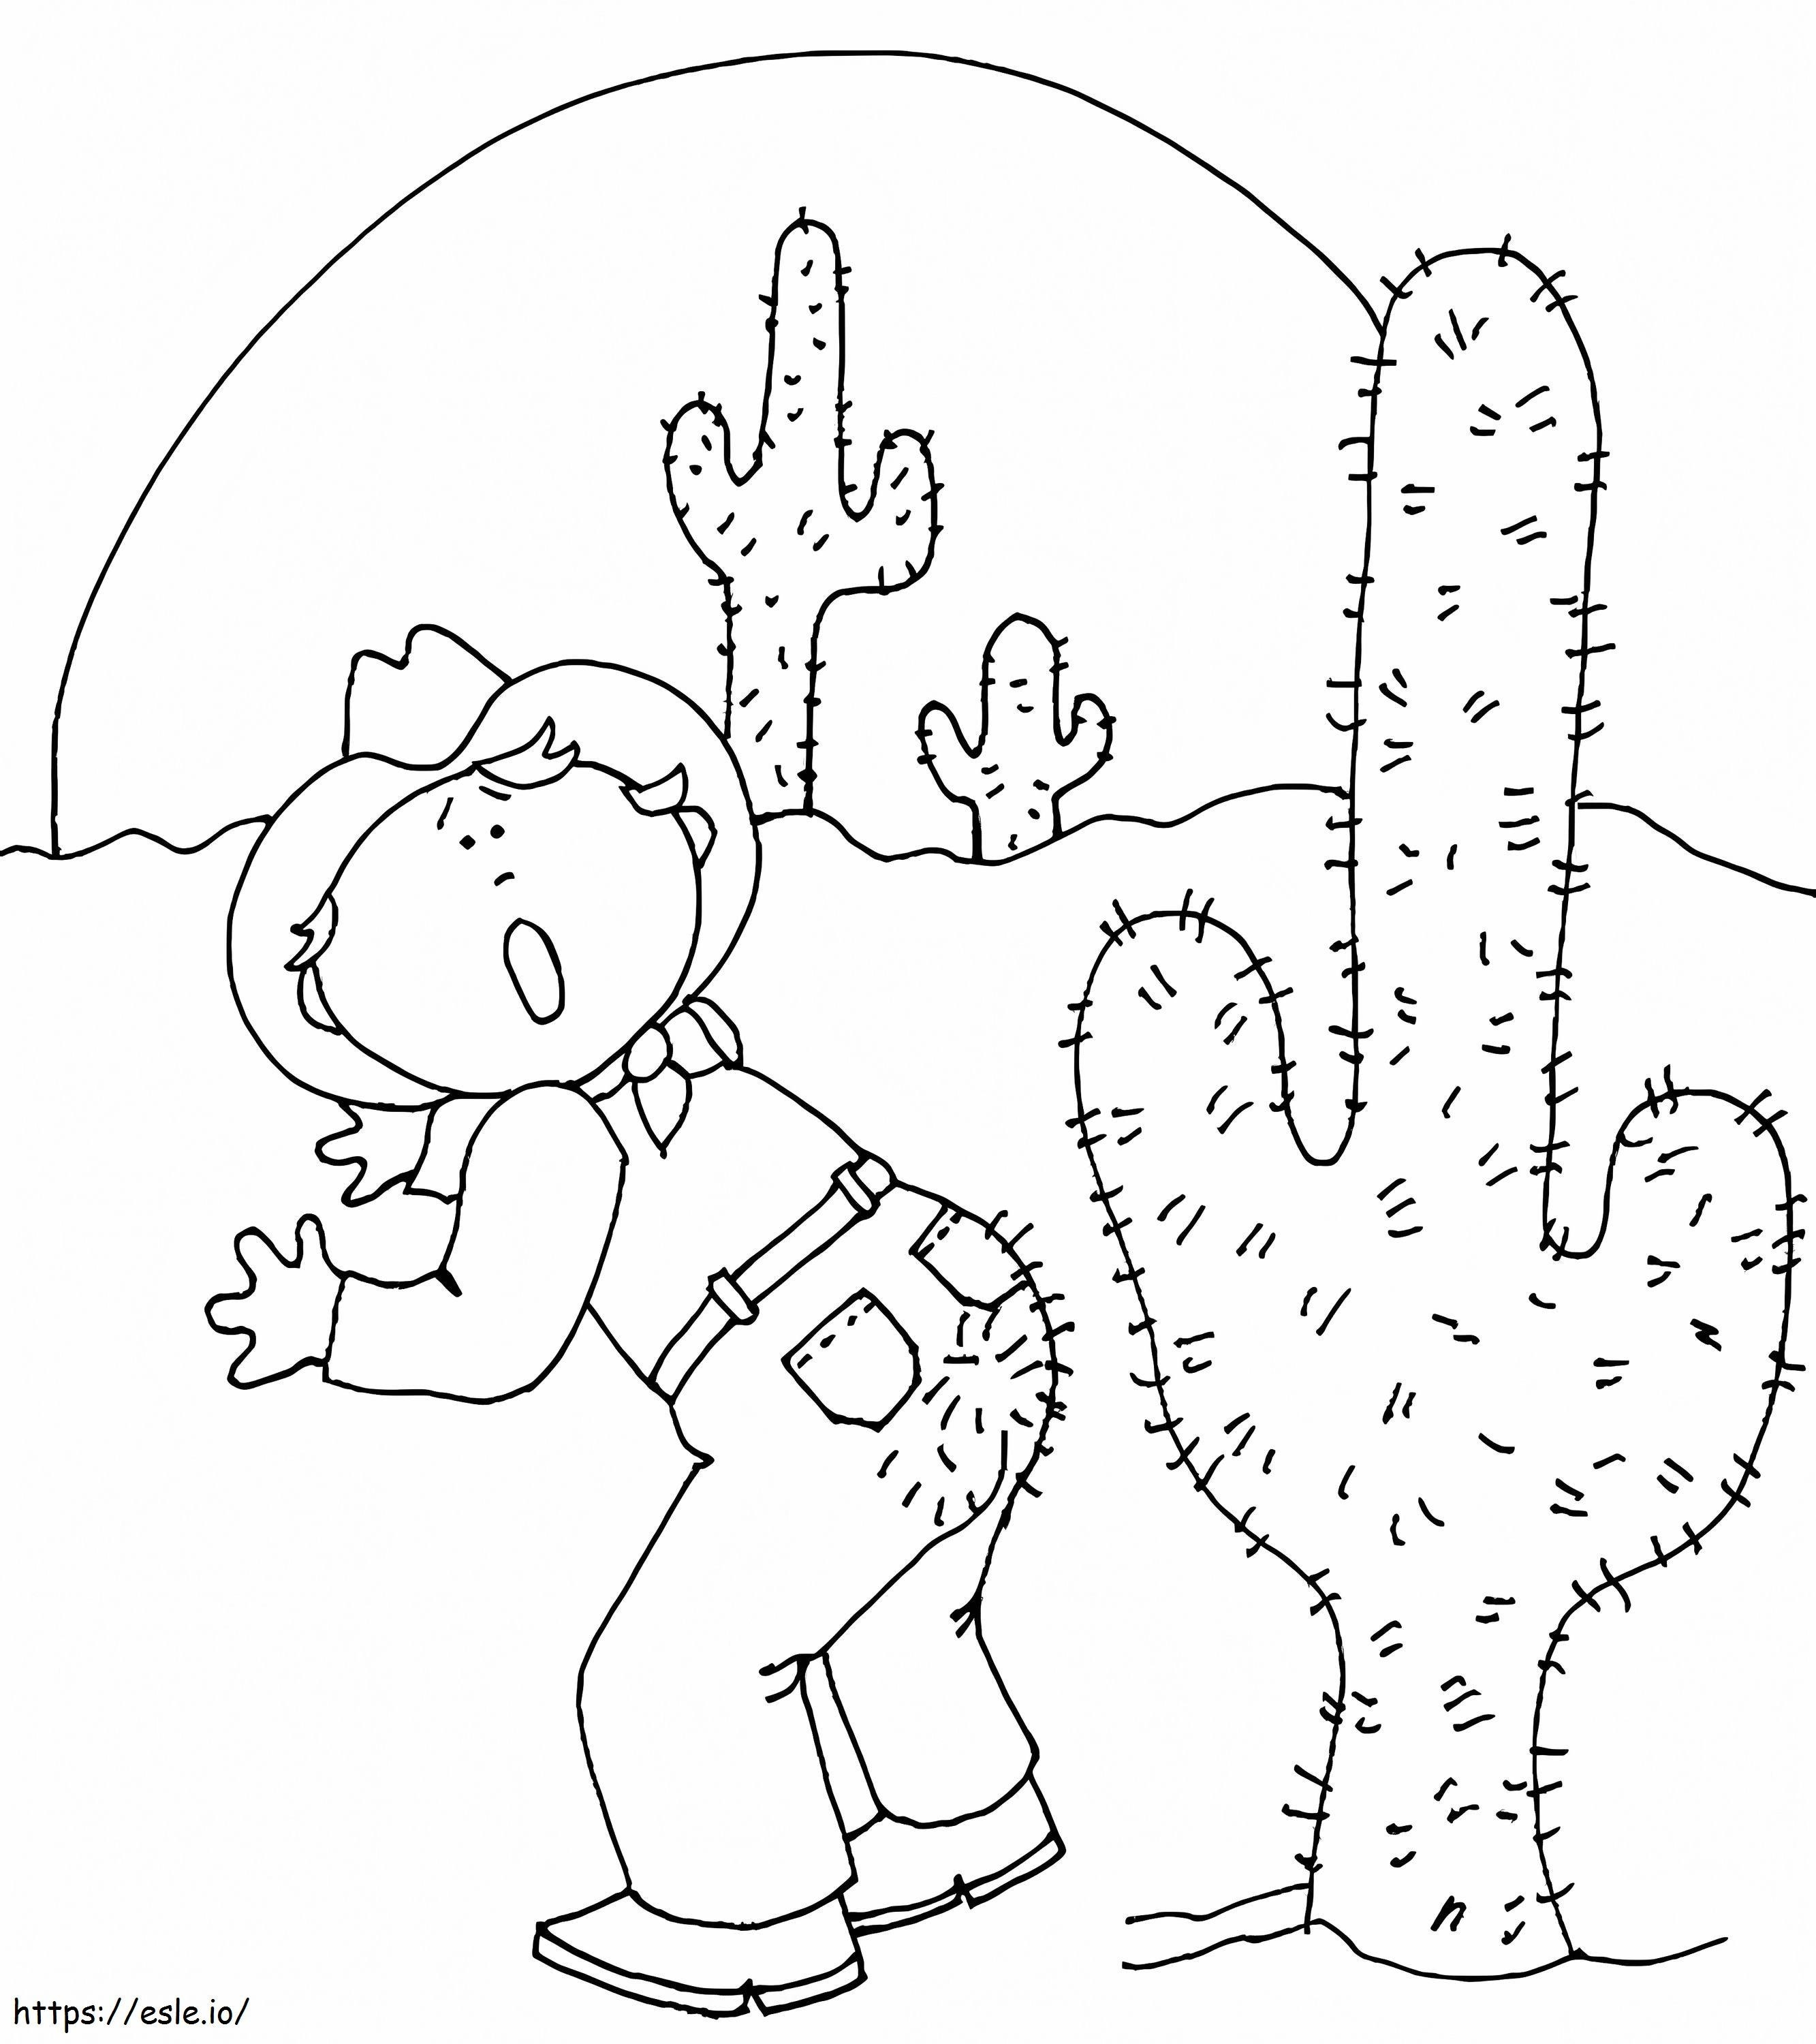 Man Stabbed By A Cactus coloring page